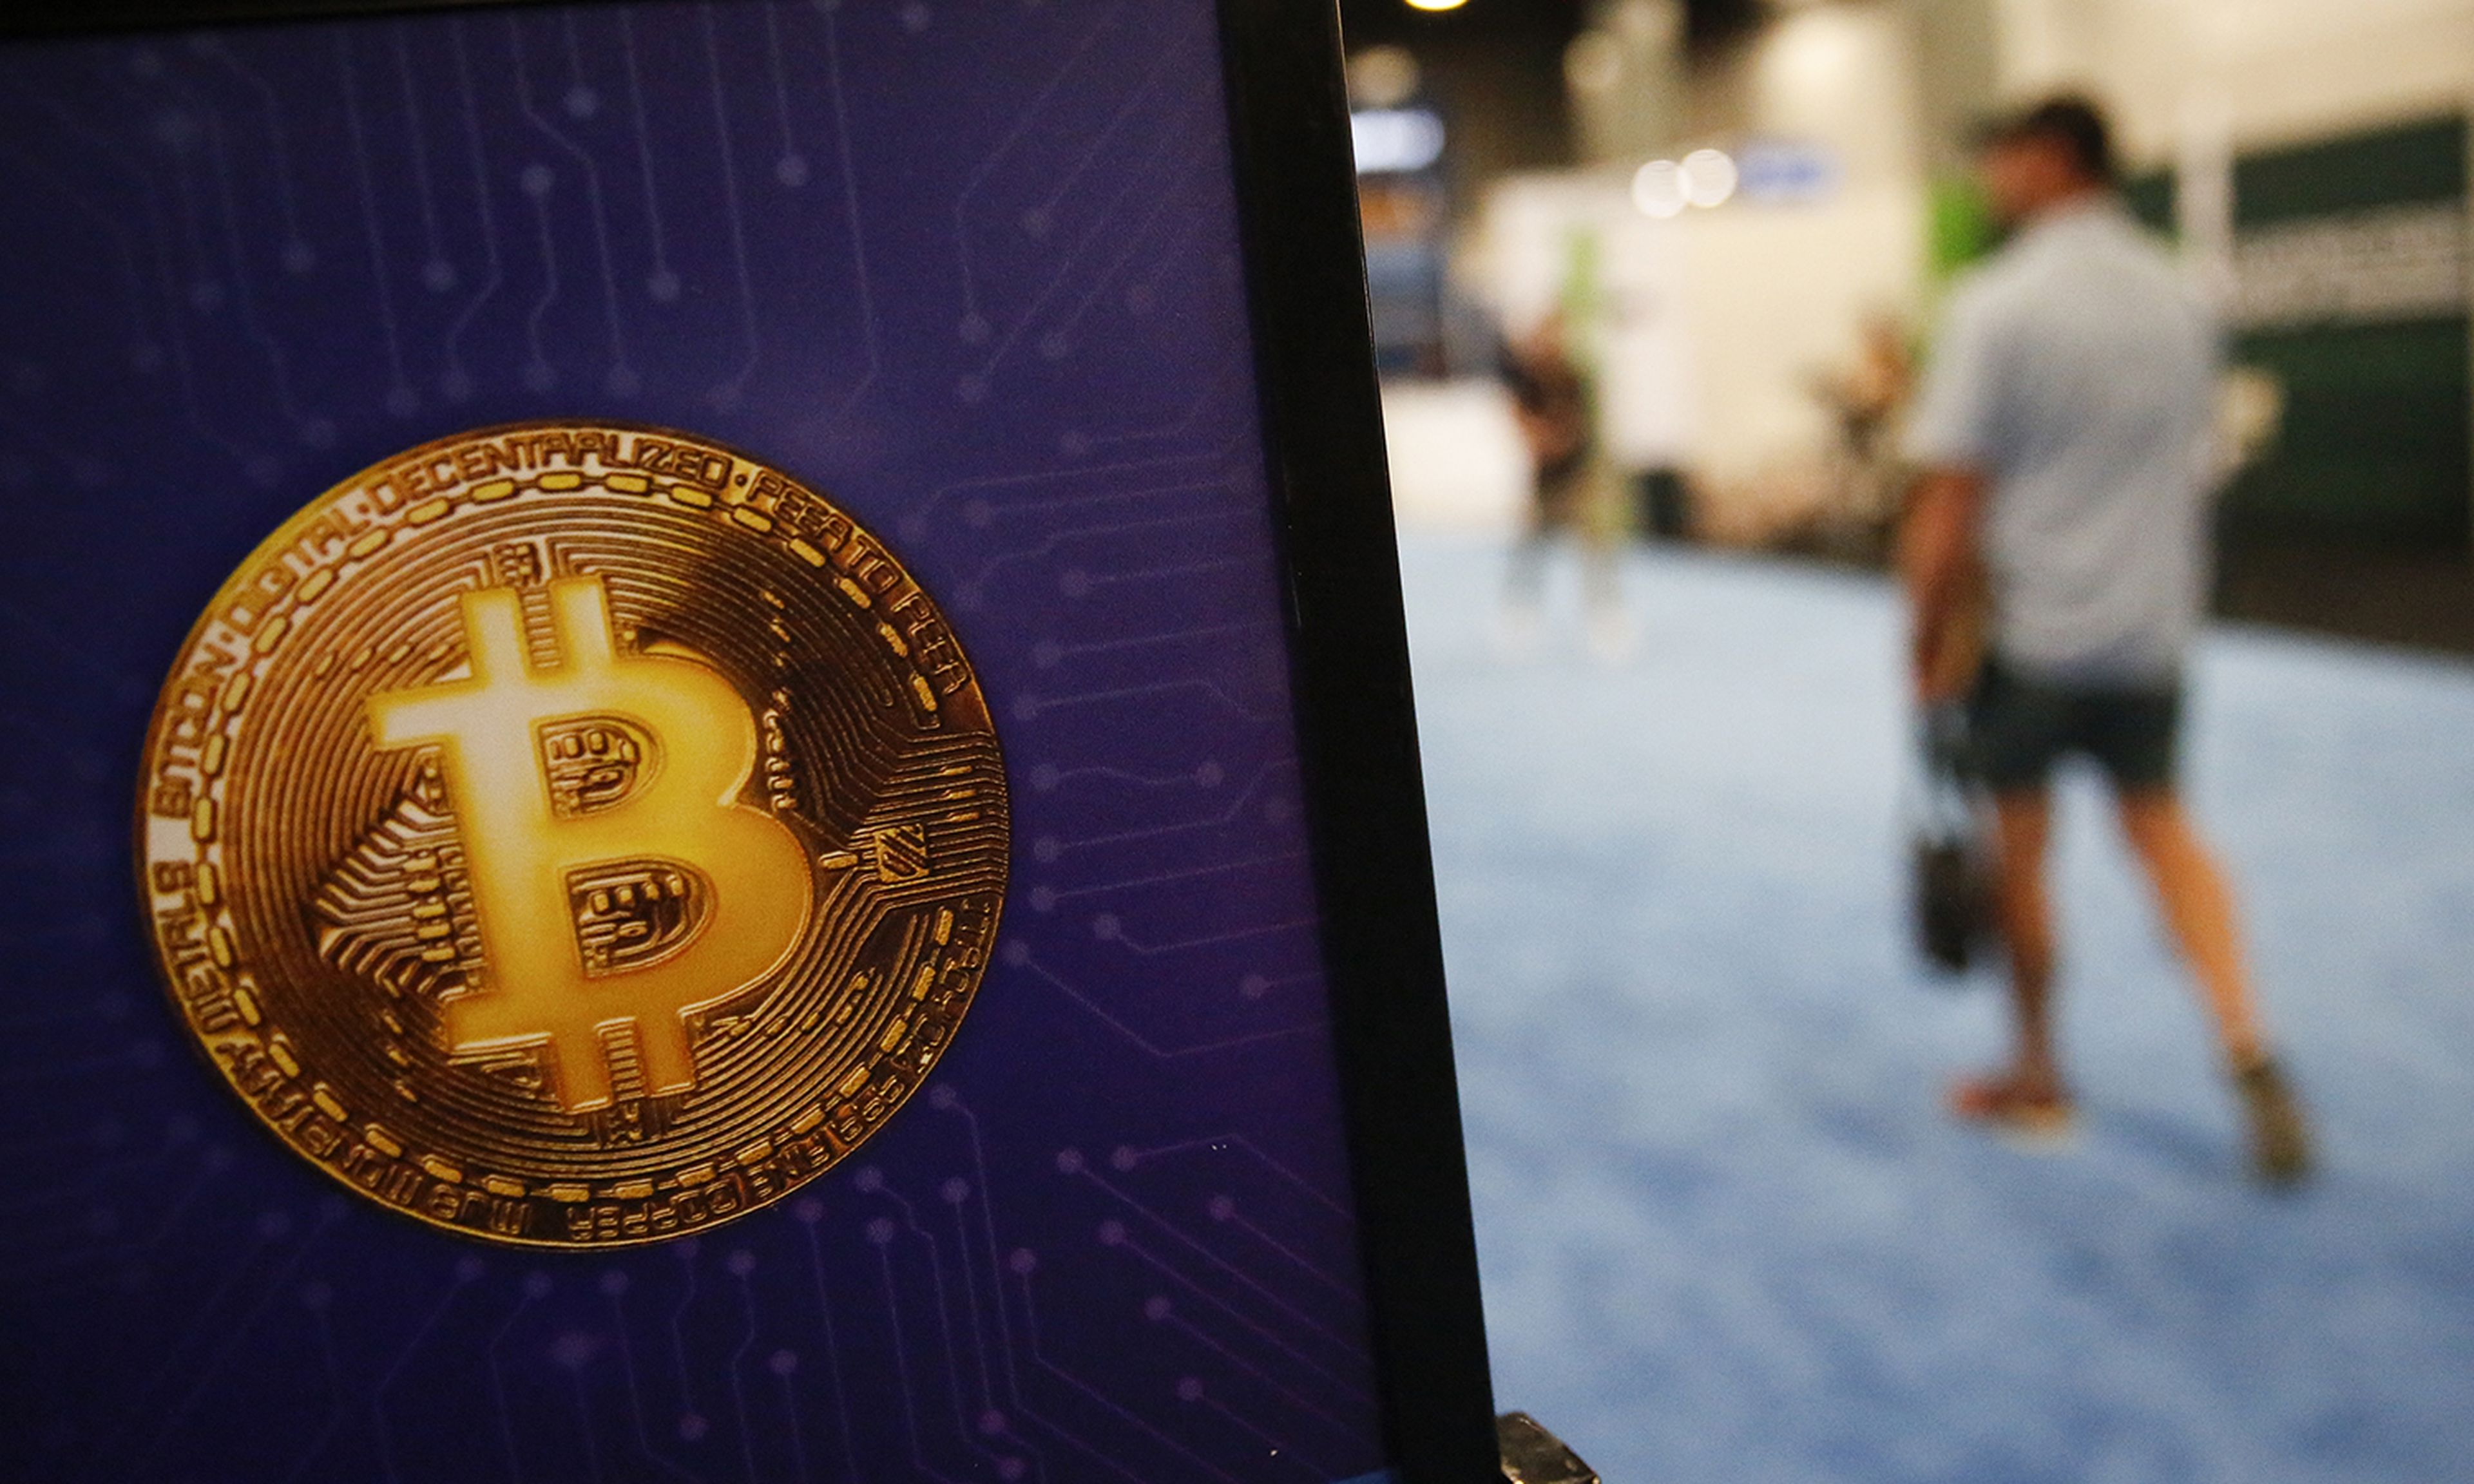 A Bitcoin logo is seen during the Bitcoin 2022 Conference at Miami Beach Convention Center on April 8, 2022, in Miami. (Photo by Marco Bello/Getty Images)